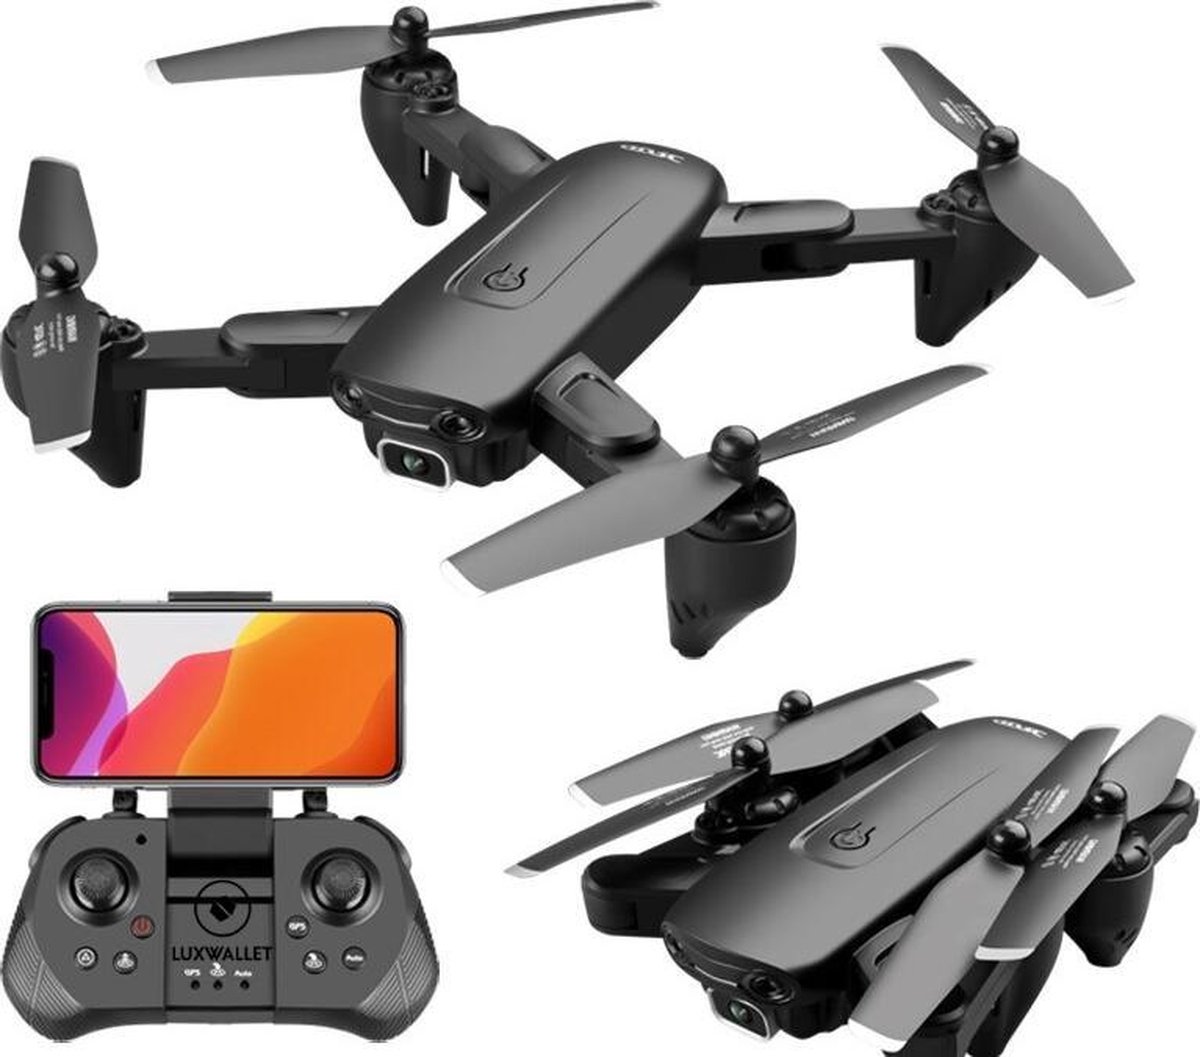 LUXWALLET SG PROX5 - 30Km/h - 200g - HD Camera - Geen vliegbewijs - VR Bril - Drone - Quadcopter - RC + 2x Accu